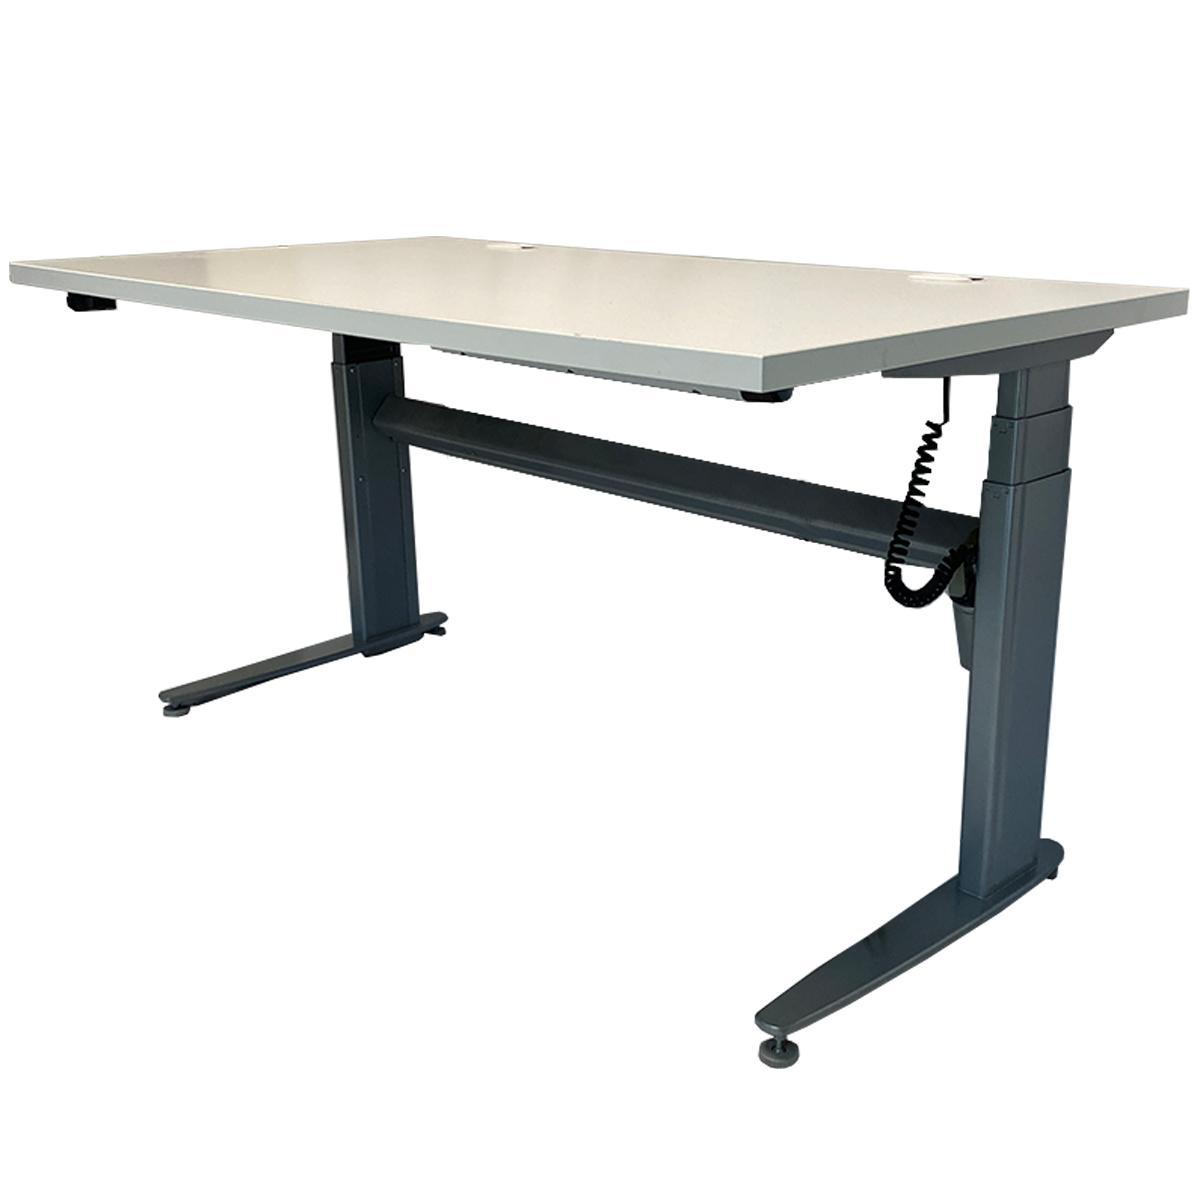 60" W Allsteel White Laminated Height Adjustable Table